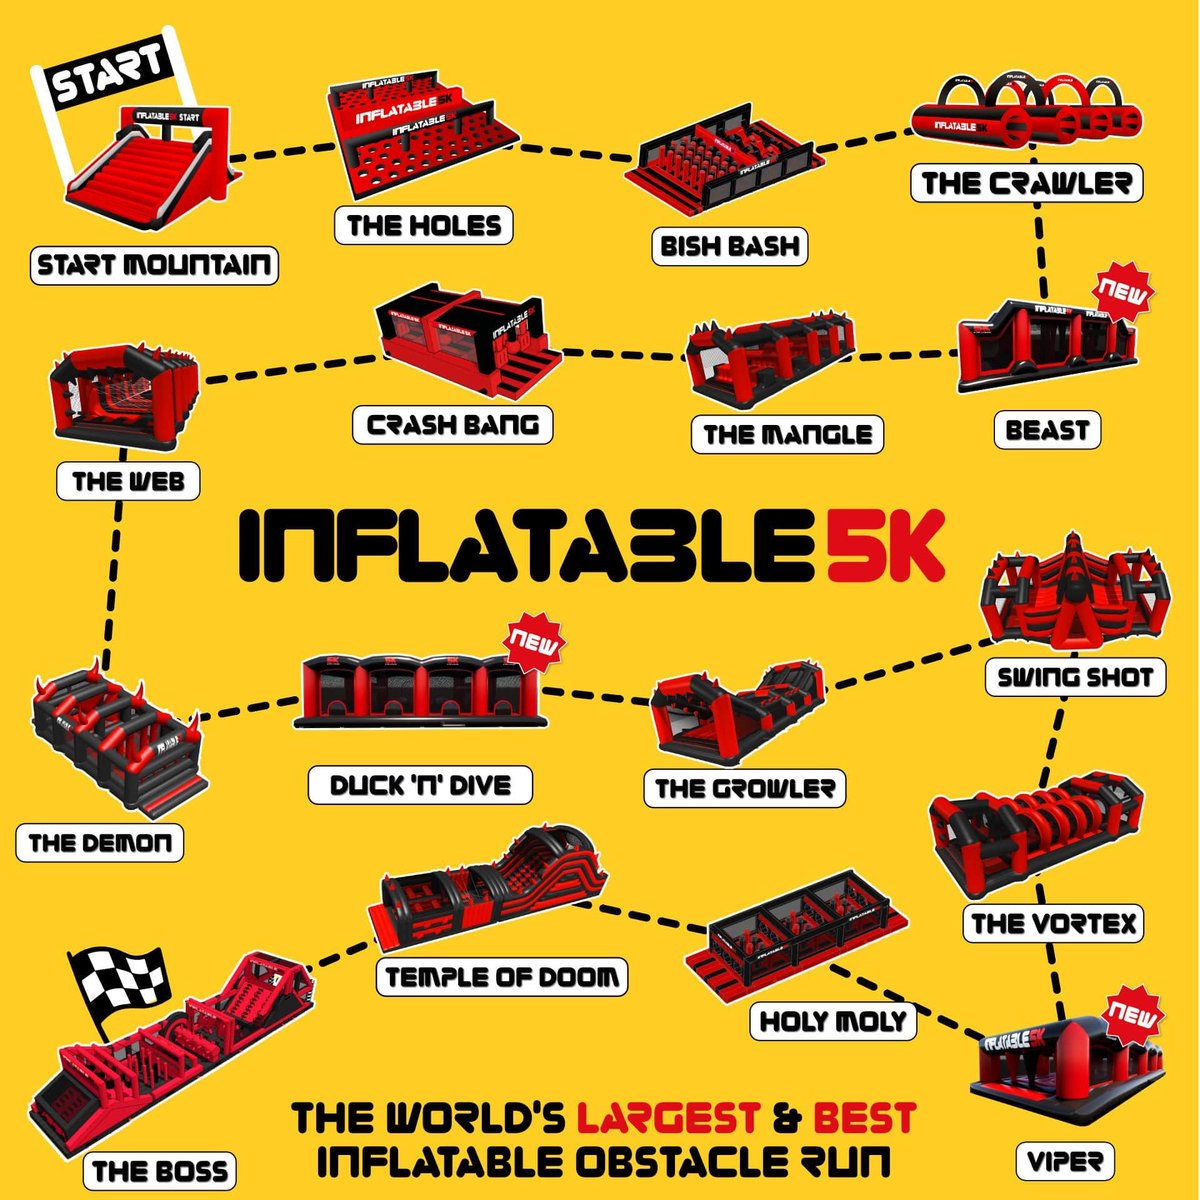 🎉WORLD'S LARGEST INFLATABLE 5K RETURNS! FREE PLACES AVAILABLE! 🎉 #SUAHour Inflatable 5k is coming to Coventry (University of Warwick) on Saturday 27th, July 2024 with additional obstacles! Perfect for the whole family! Sign up FREE online now! buff.ly/3UxiVVO